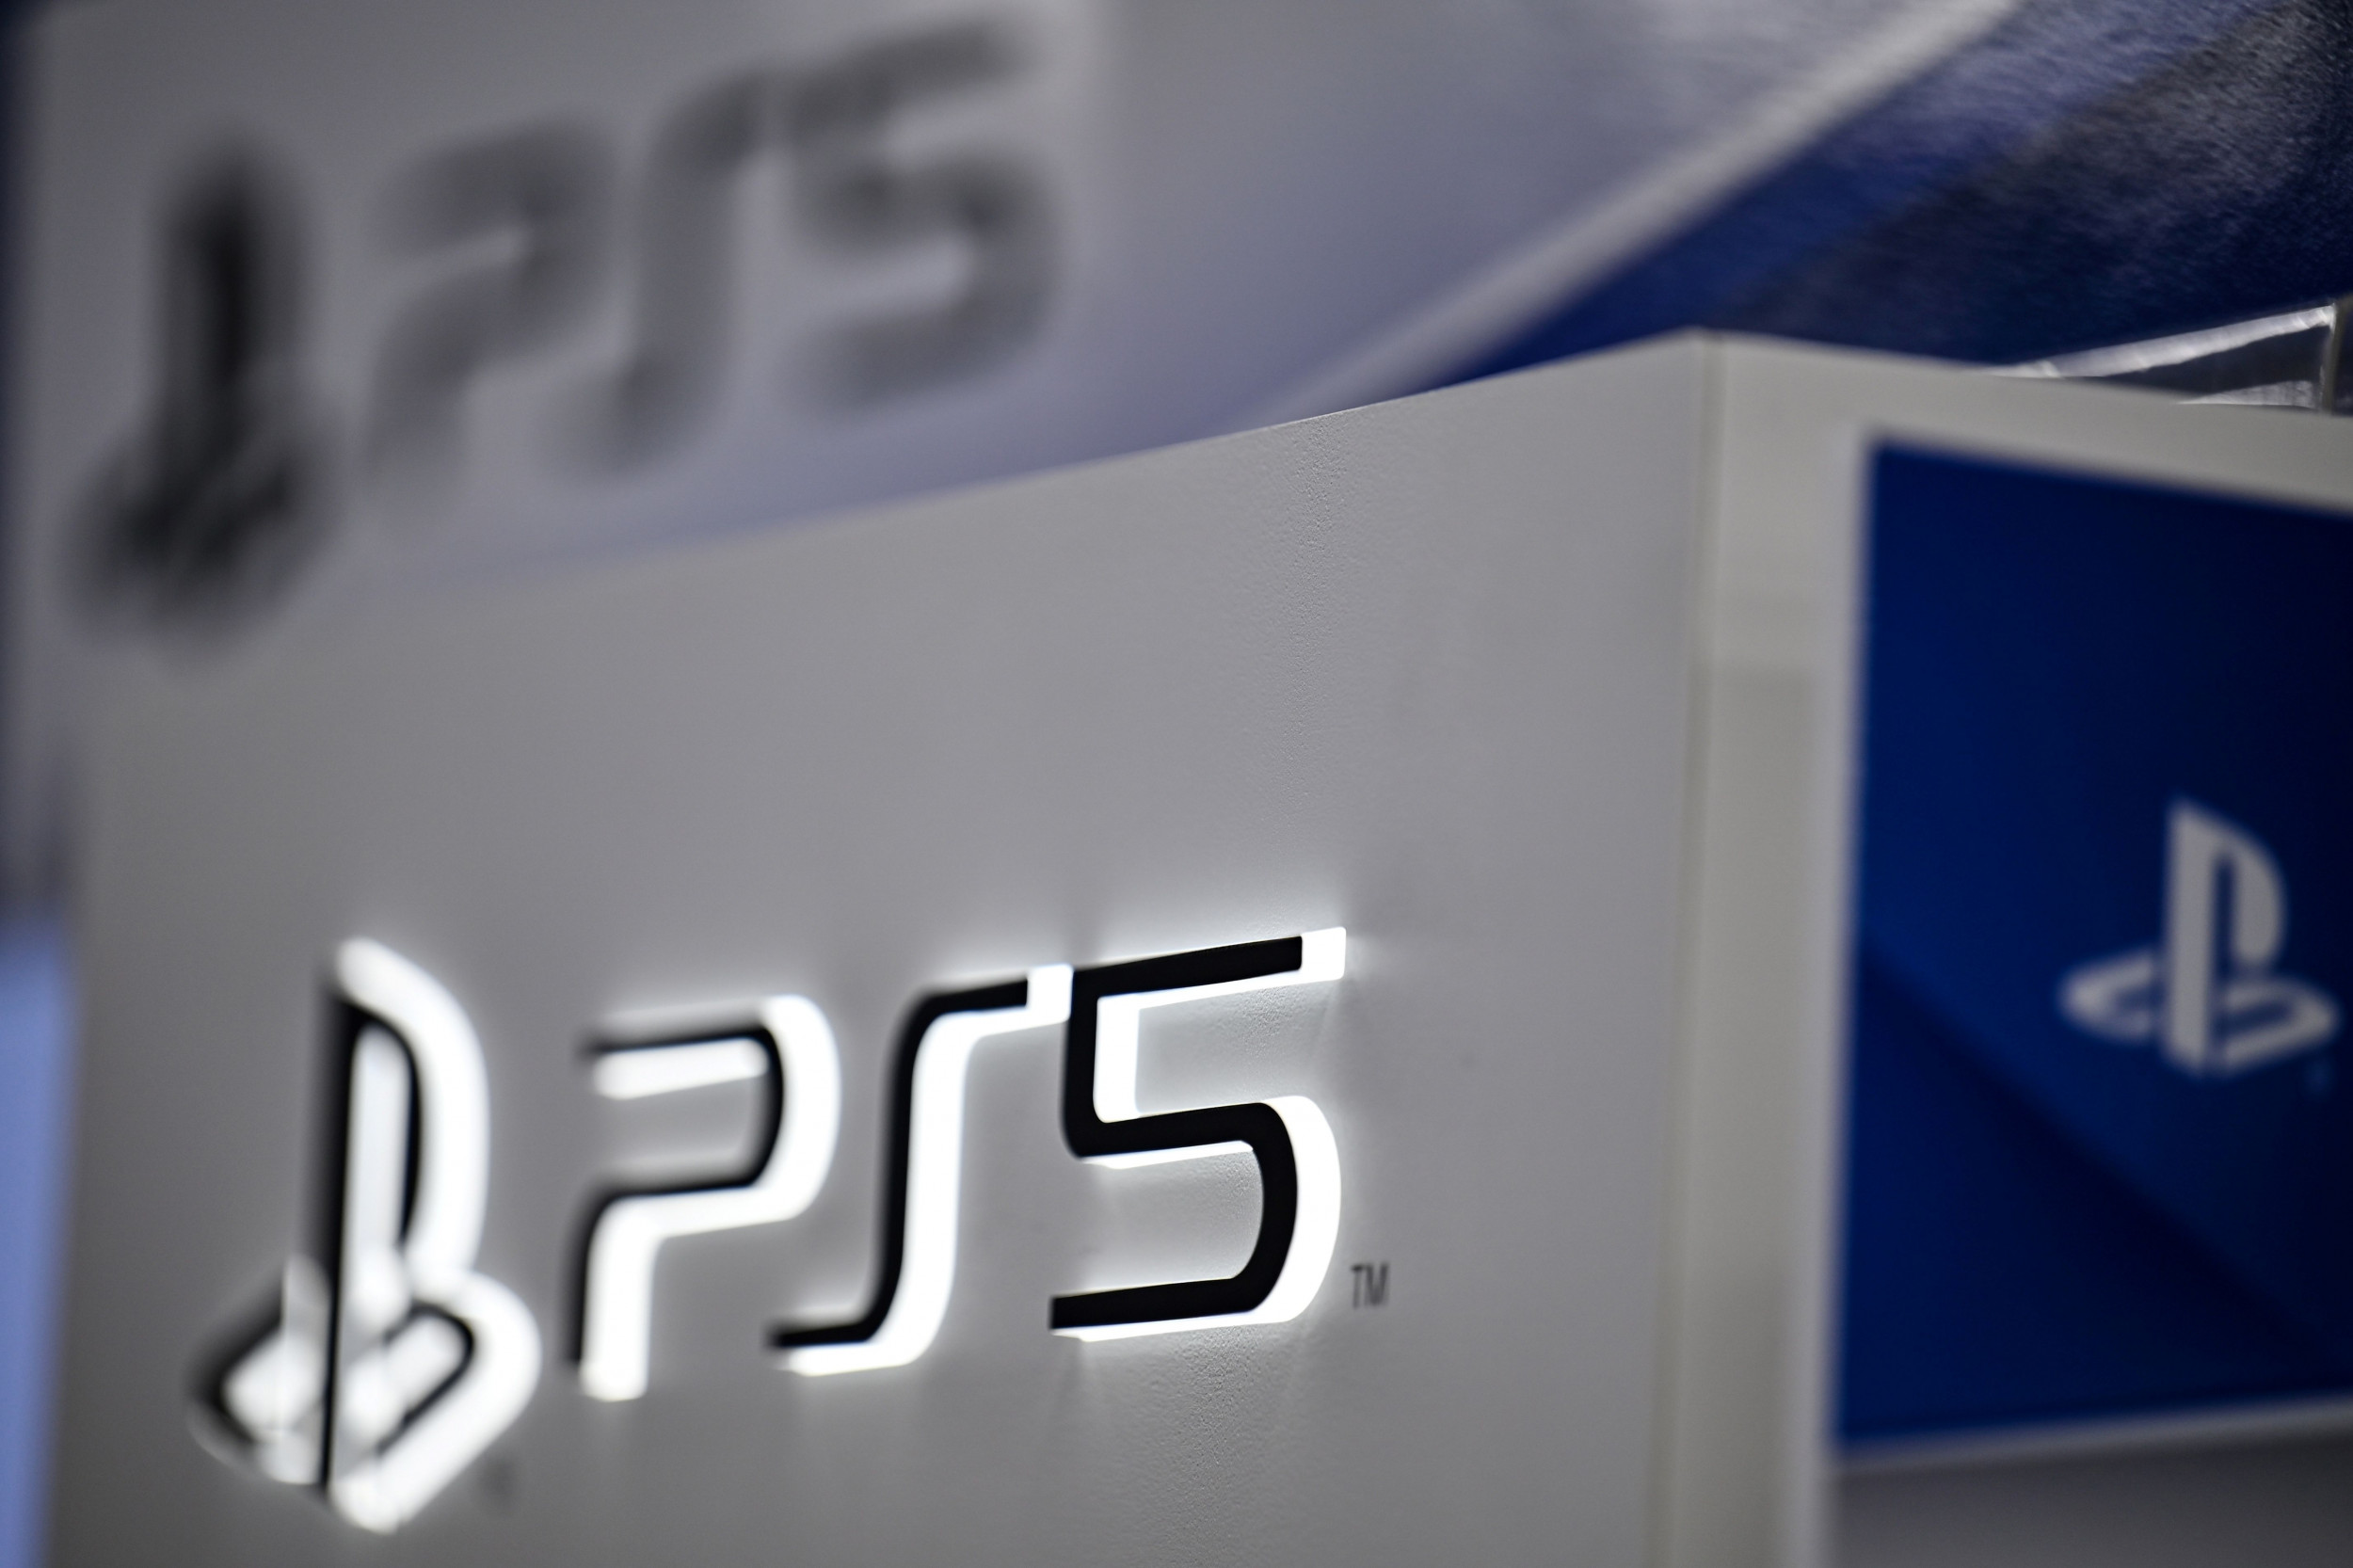 PS5 refueling update for Target, Antonline, Walmart, Sony Rewards, GameFly and more